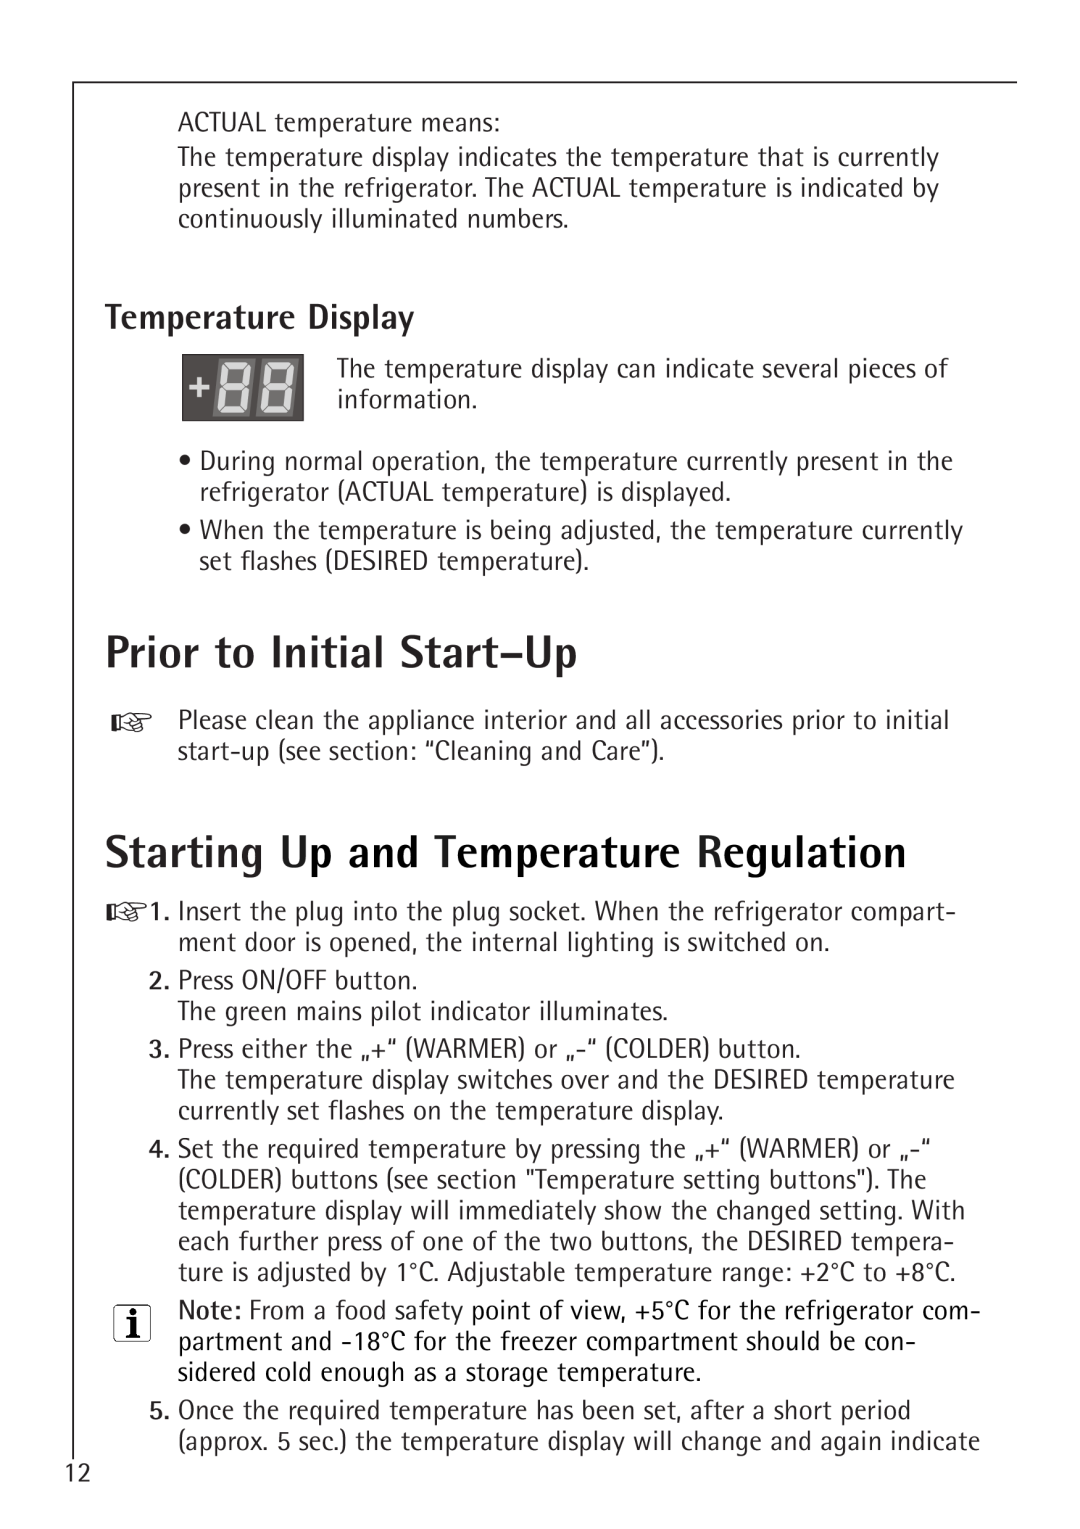 Electrolux K 98840-4 i, K 91240-4 i Prior to Initial Start-Up, Starting Up and Temperature Regulation, Temperature Display 